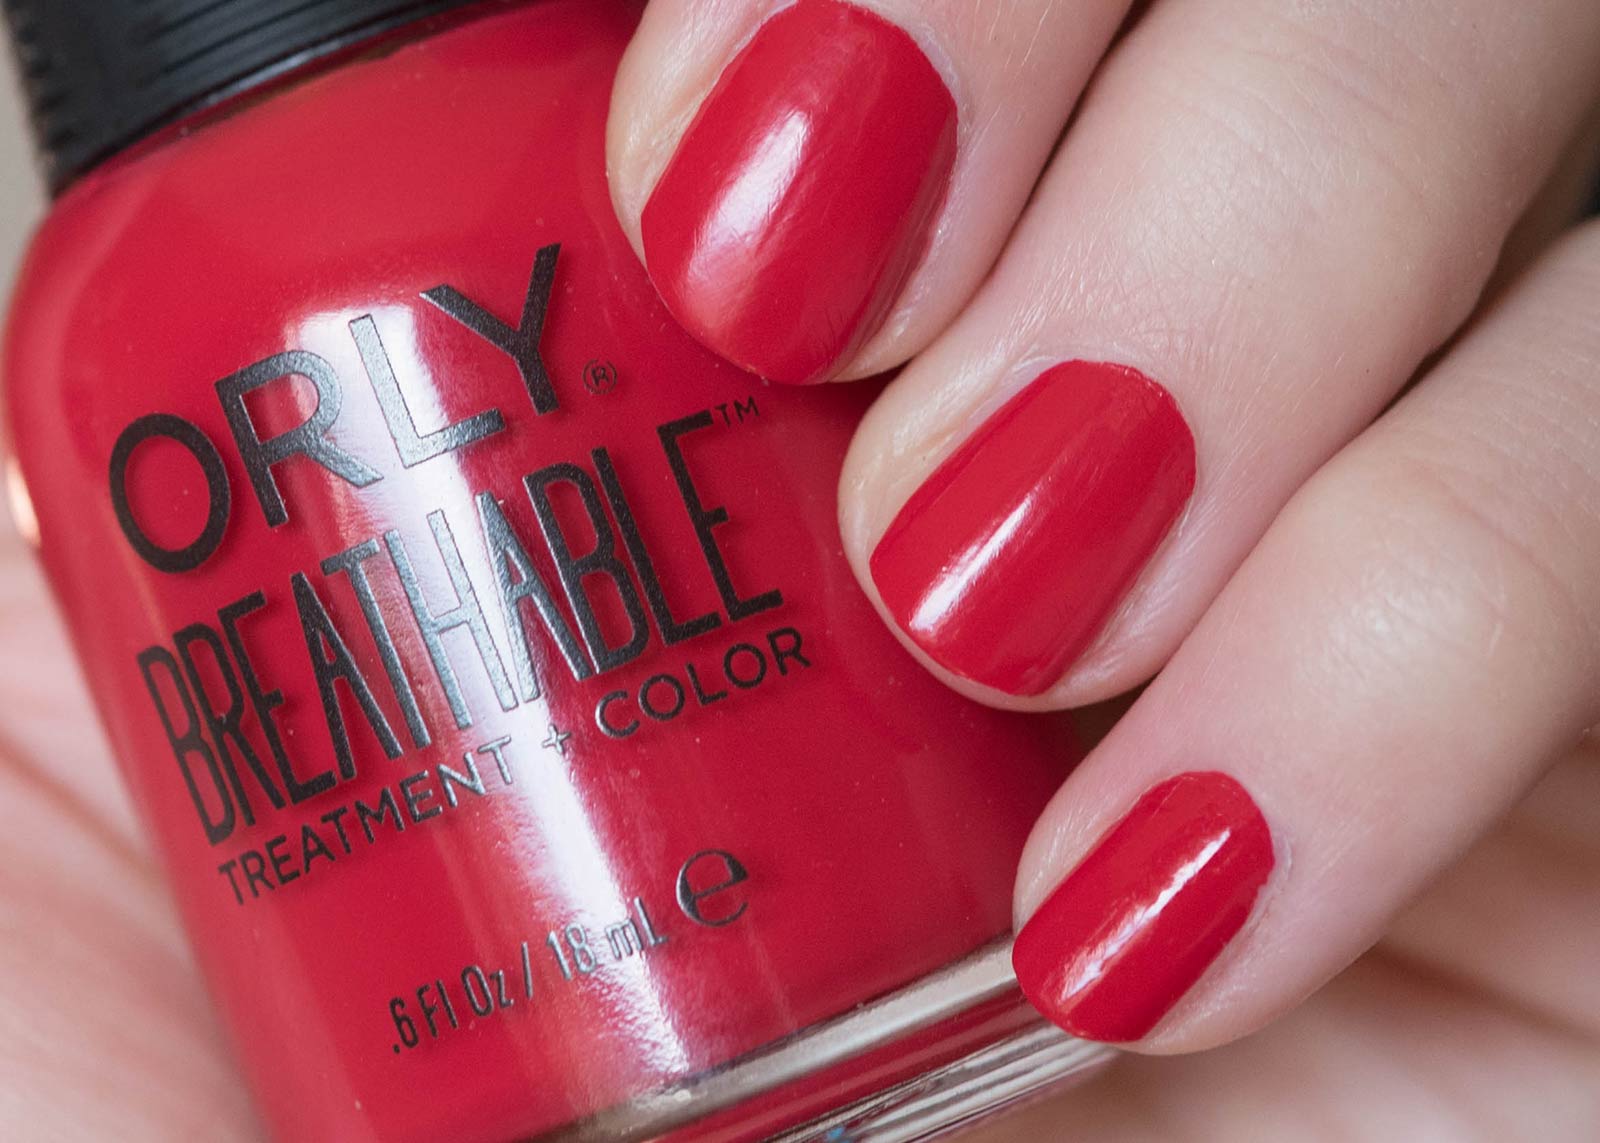 ORLY Breathable Treatment + Color Nail Polish in "Love My Nails" - wide 8